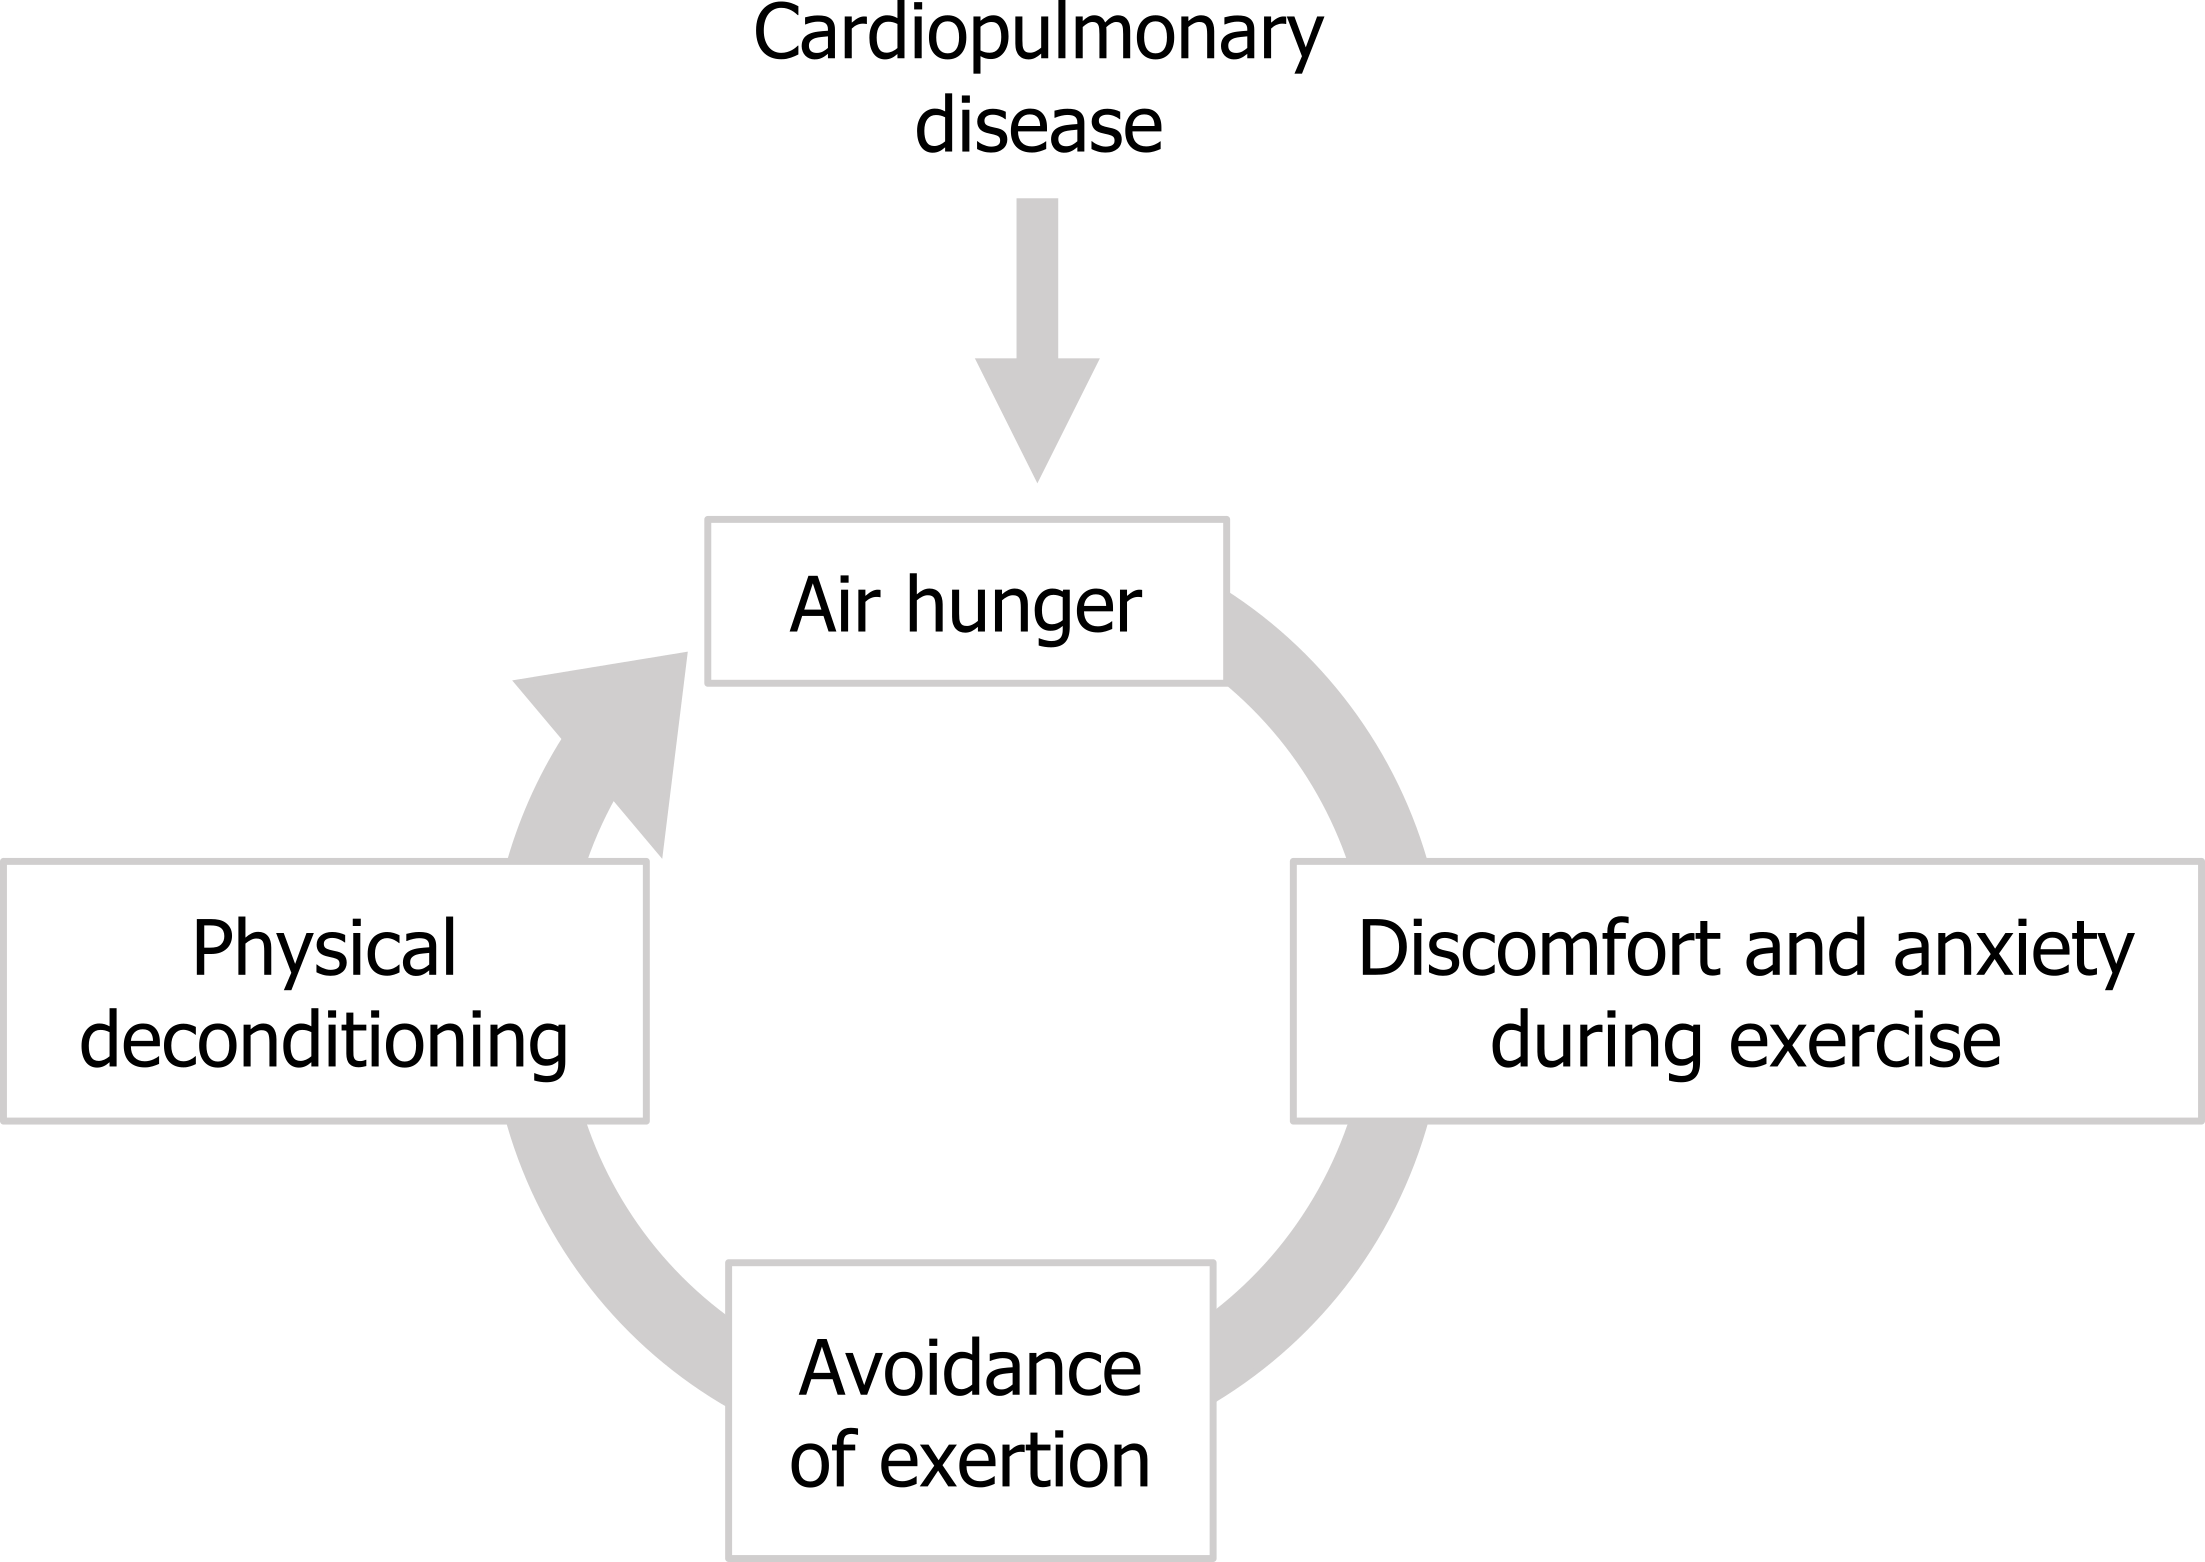 Circular arrow diagram. Text around circle clockwise: discomfort and anxiety during exercise arrow avoidance of exertion arrow physical deconditioning arrow air hunger. CardioPulmonary Disease arrow to air hunger.